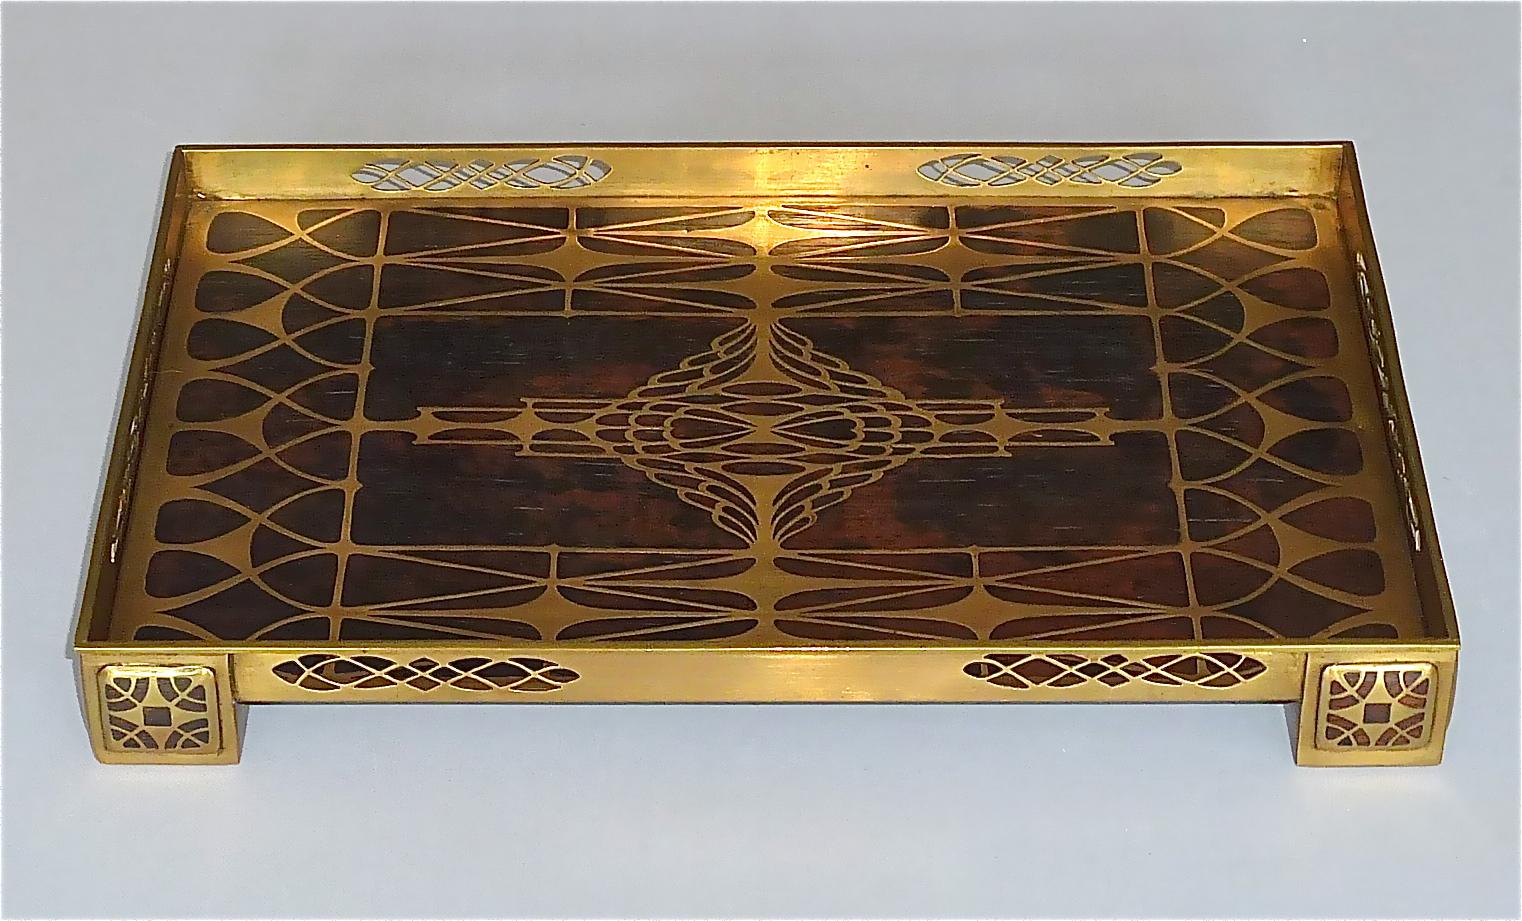 Hand-Crafted Large Tray and Pen Holder Pot Erhard & Sohne Wood Inlay Brass Art Nouveau, 1900